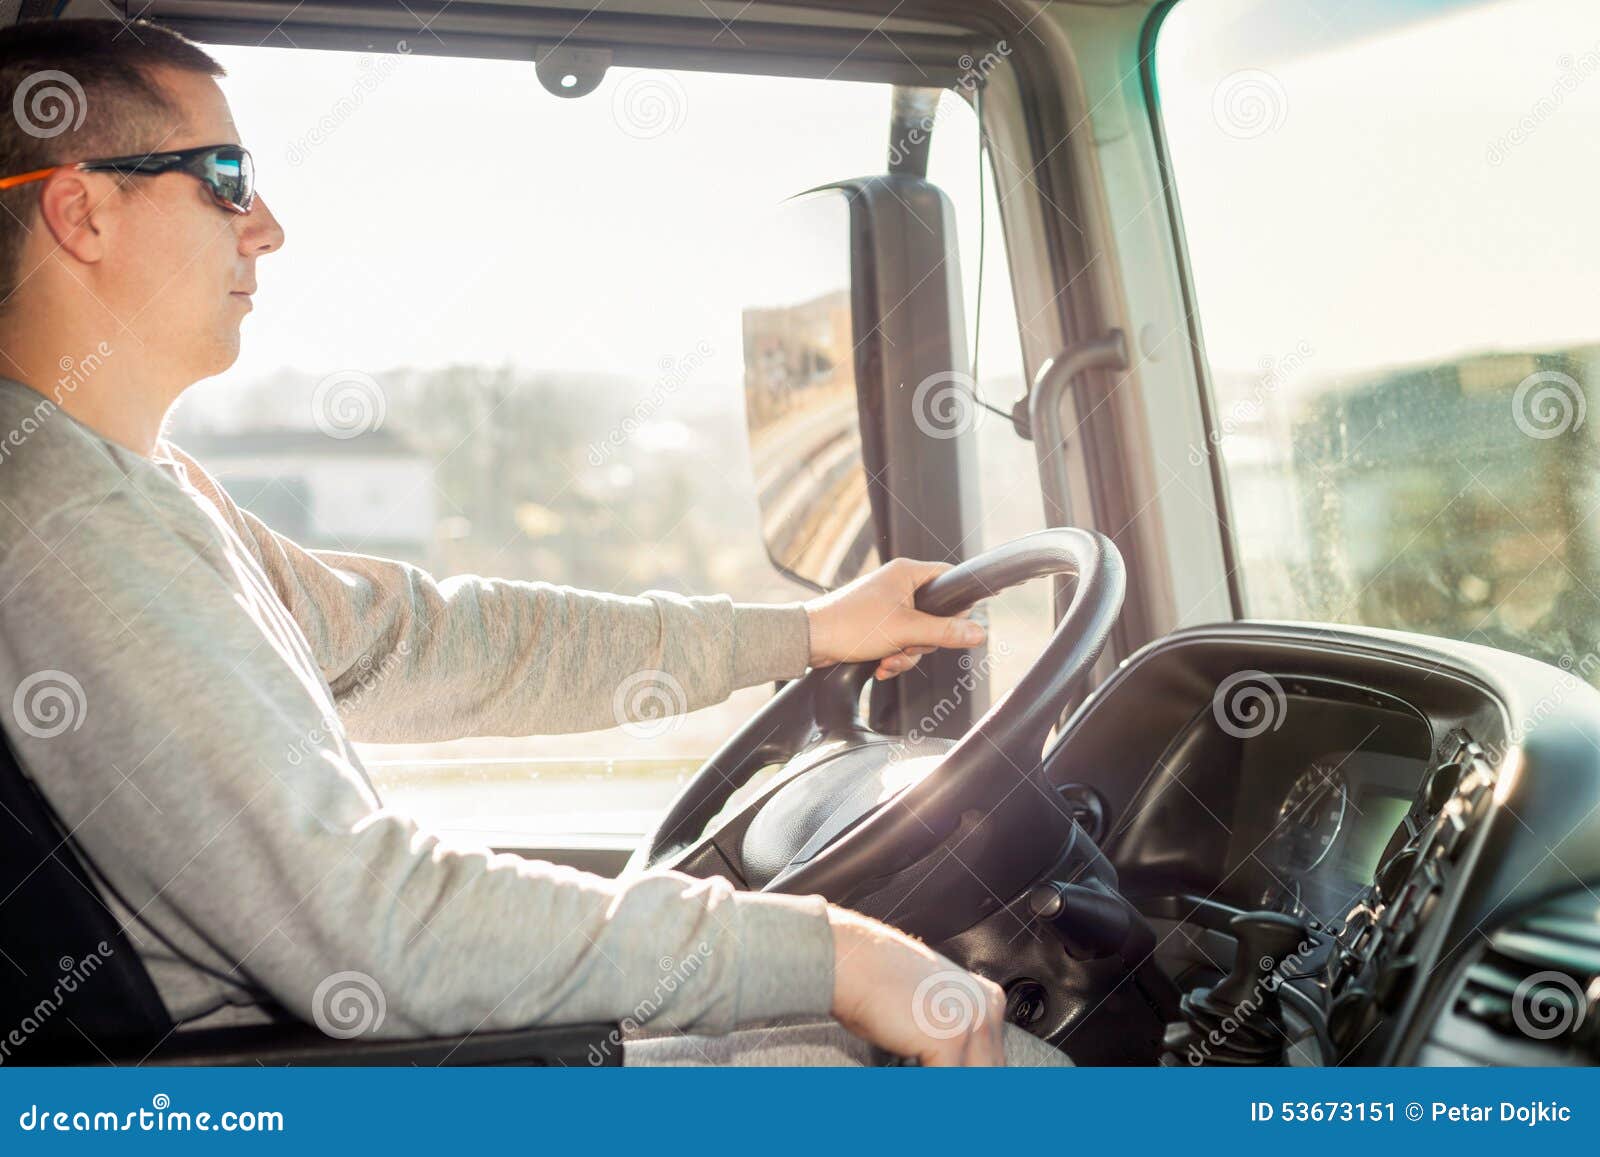 truck driver in the cab